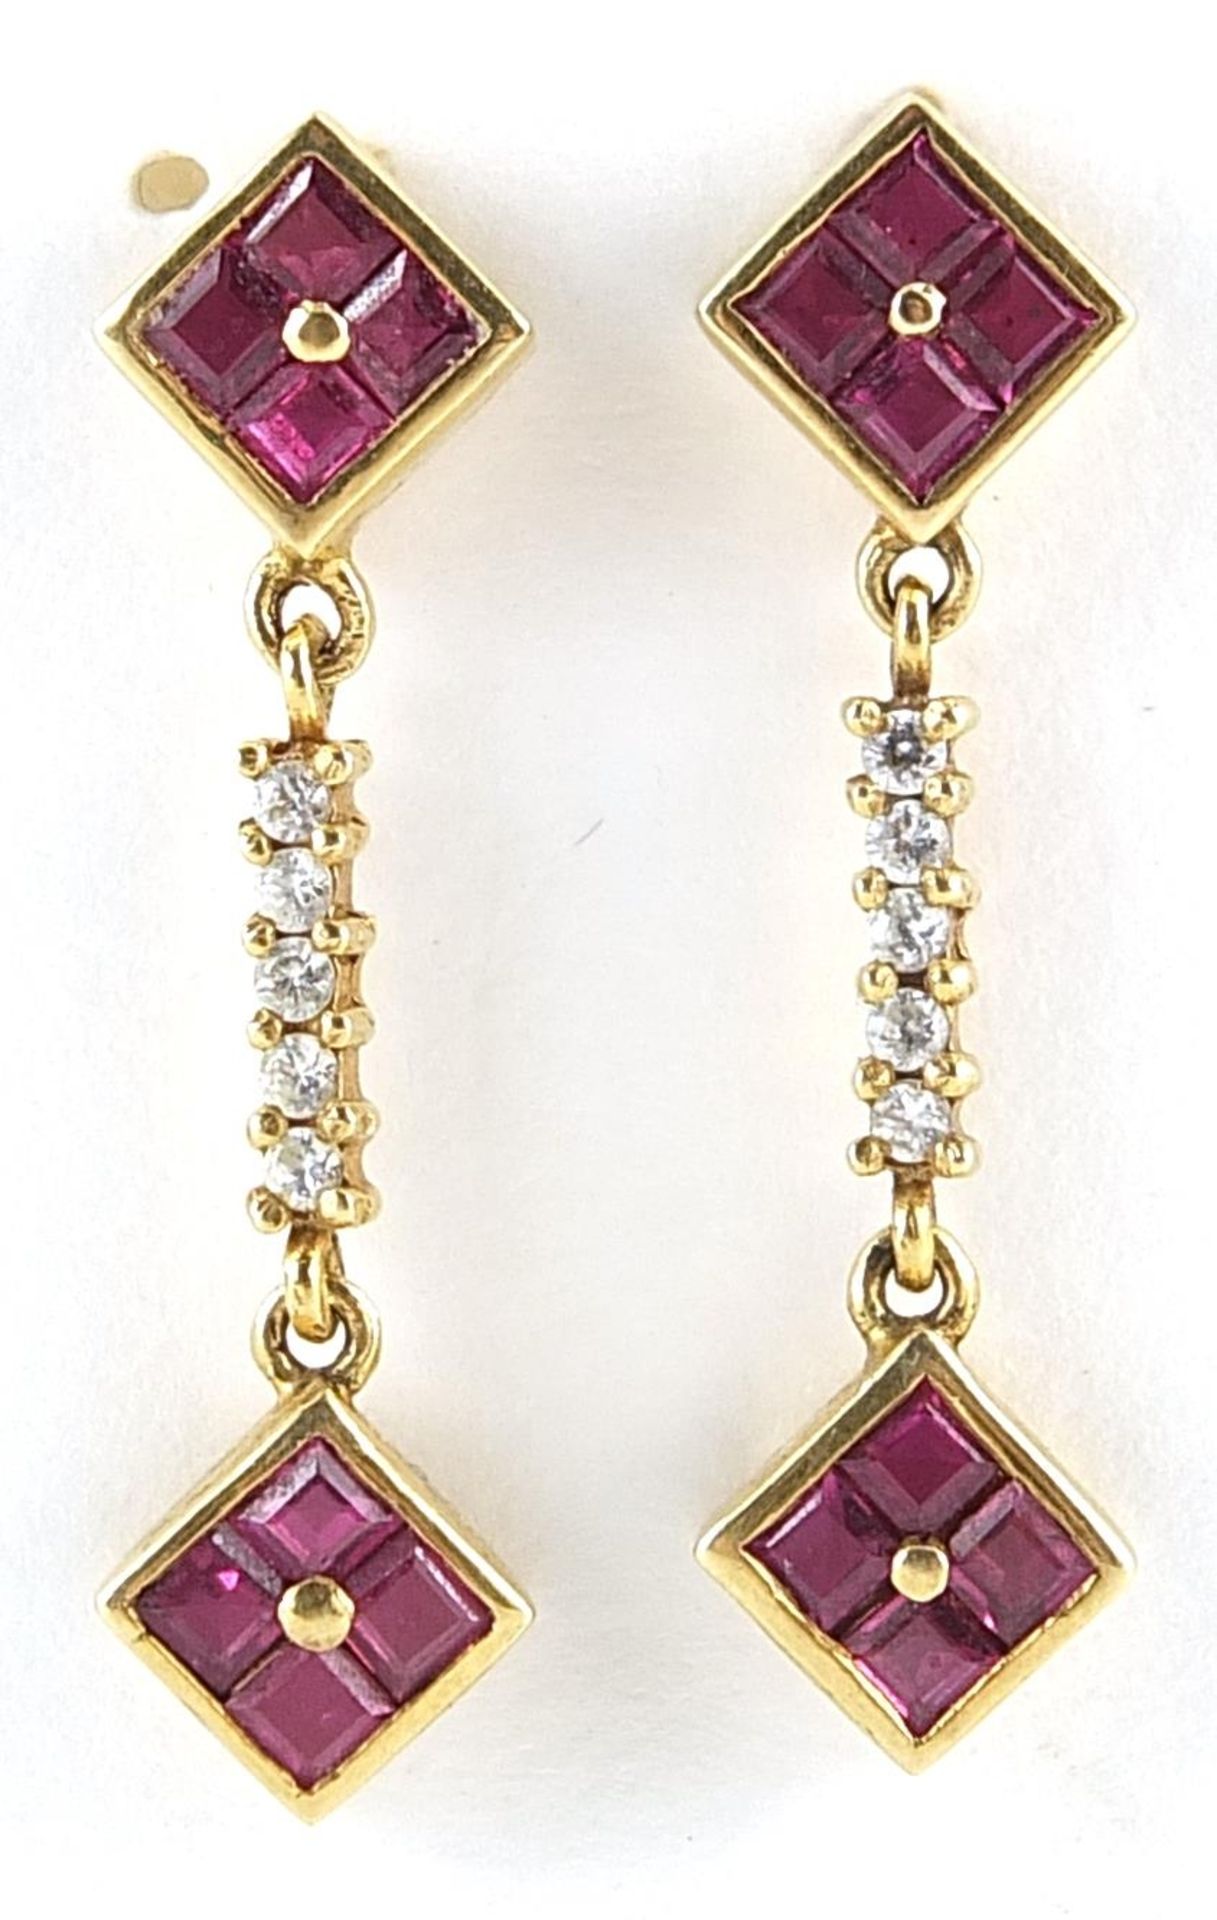 Pair of 14k clear and pink and clear stone drop earrings, 2.7cm high, 3.4g